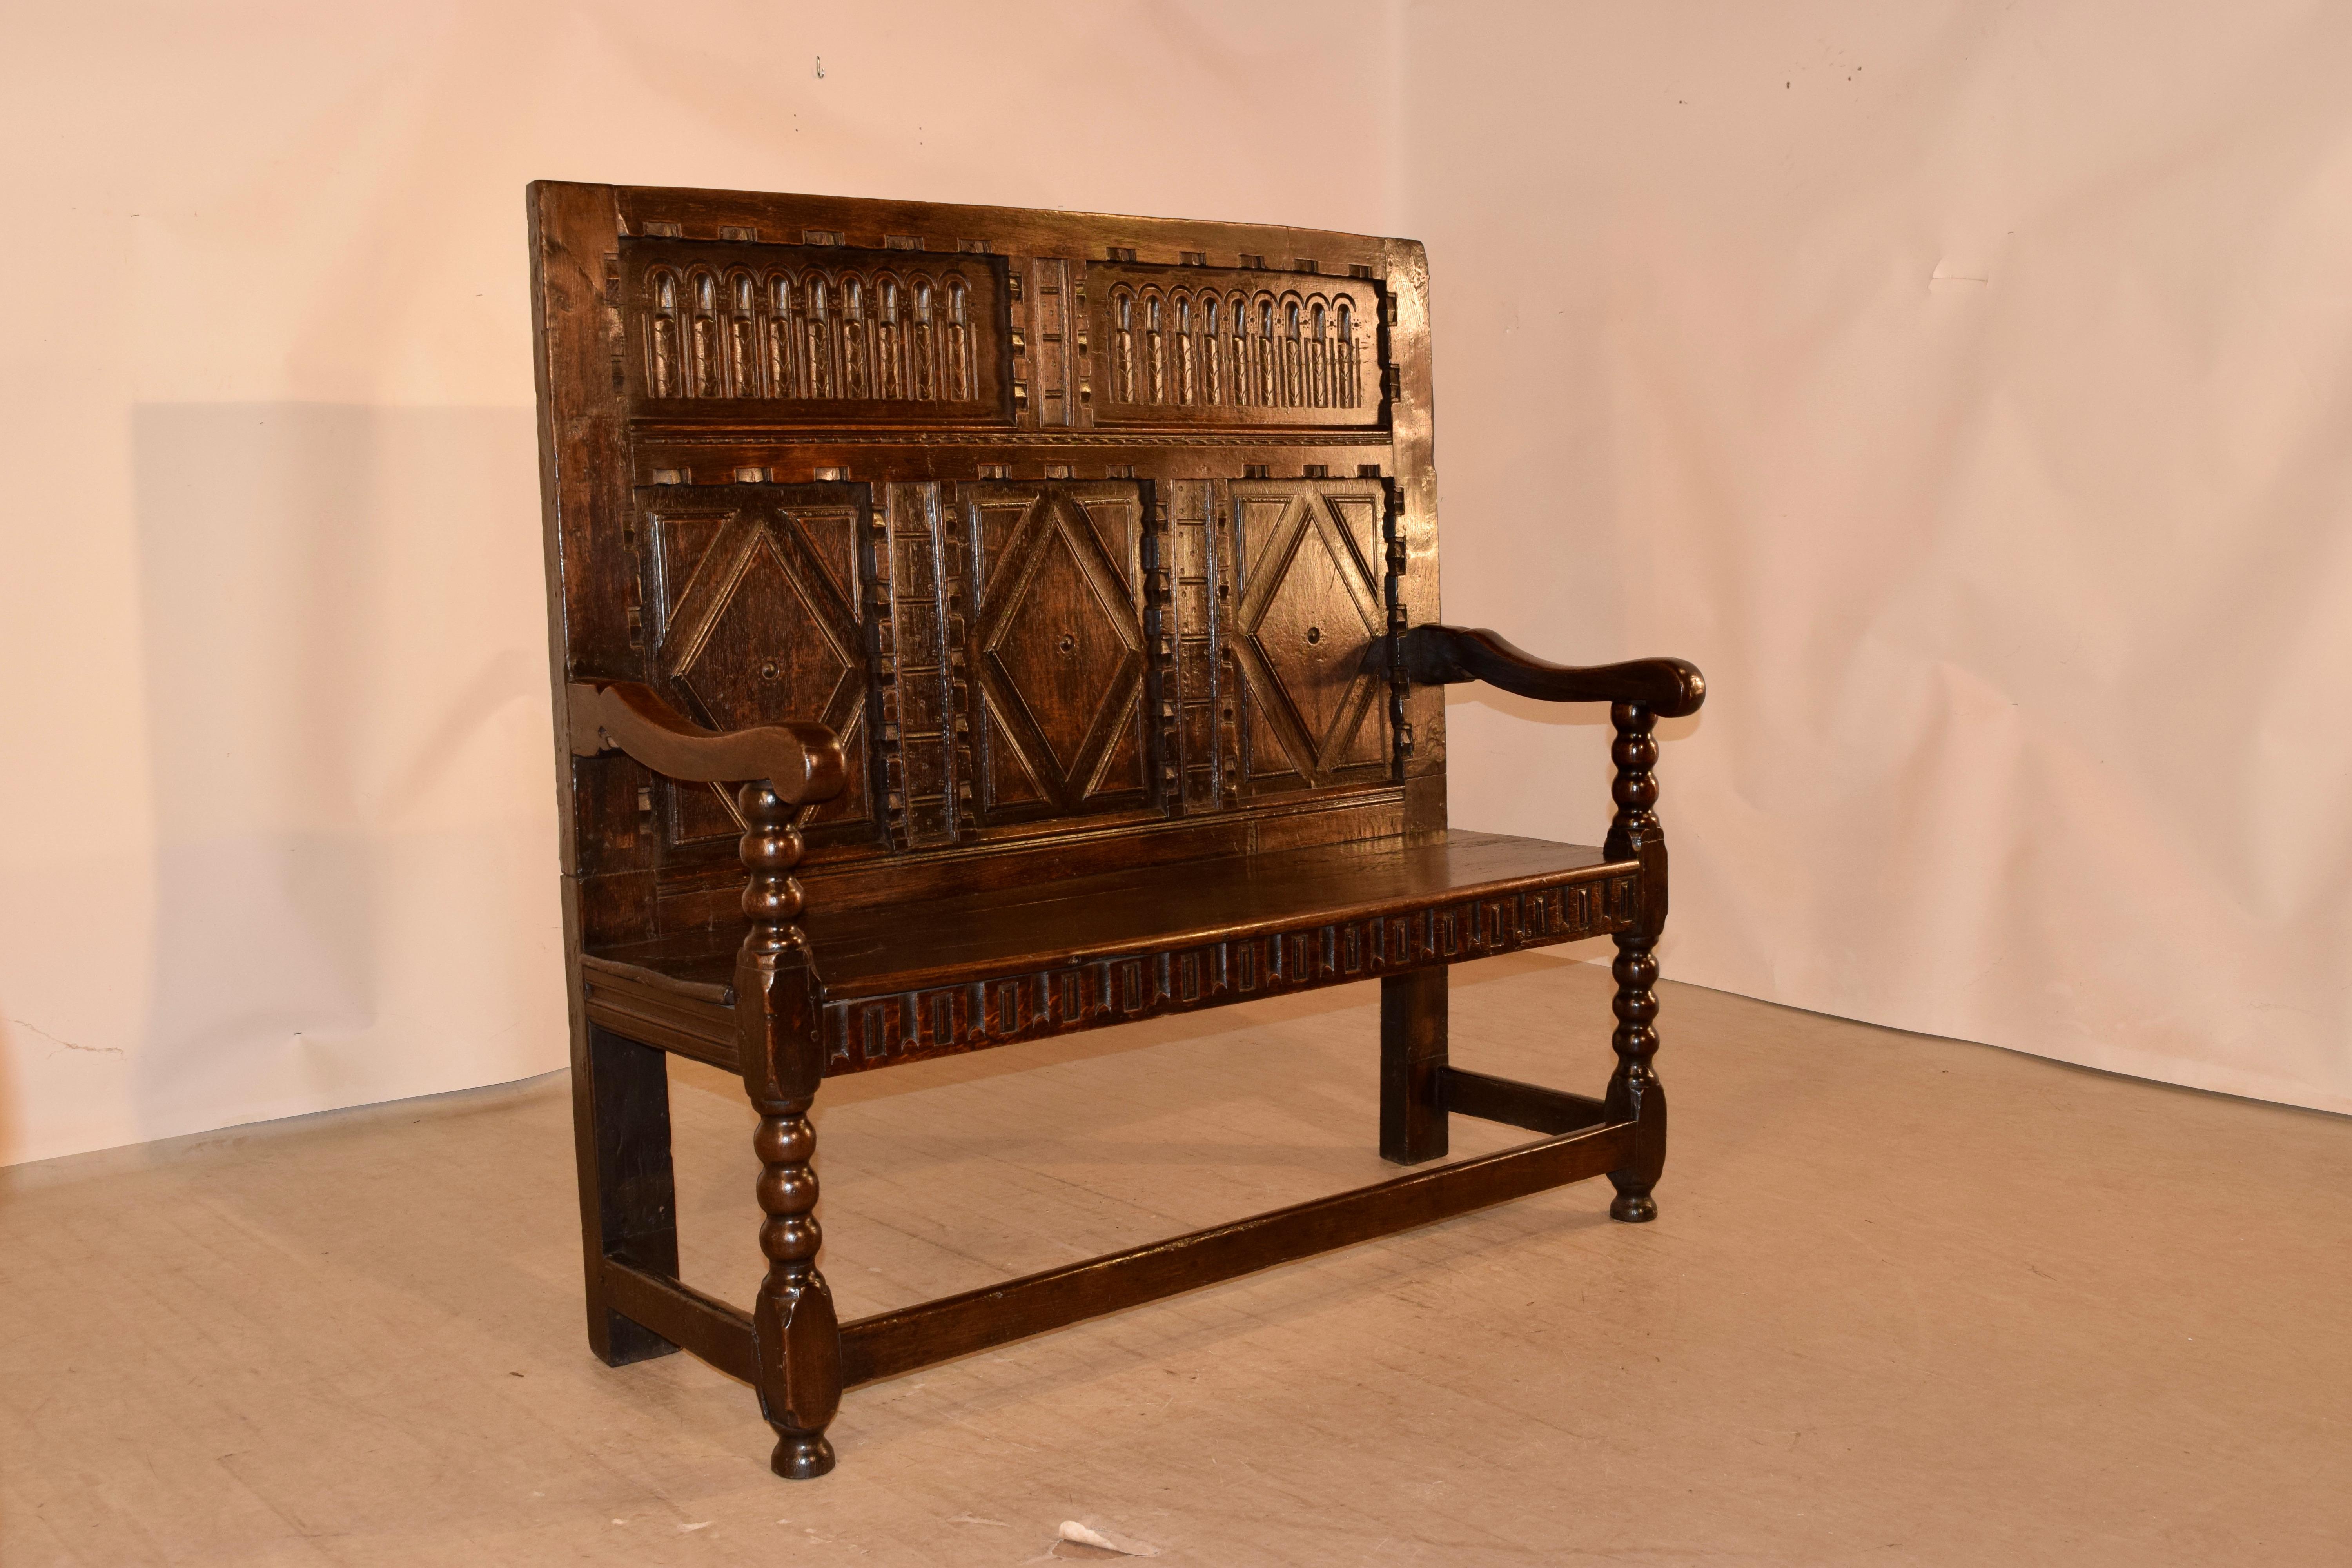 18th century oak settle from England with a wonderfully hand carved decorated and paneled back and rolled arms over hand turned bobbin arms and front legs. The seat height measures 18.75 inches and is over a hand carved apron. The legs are joined by